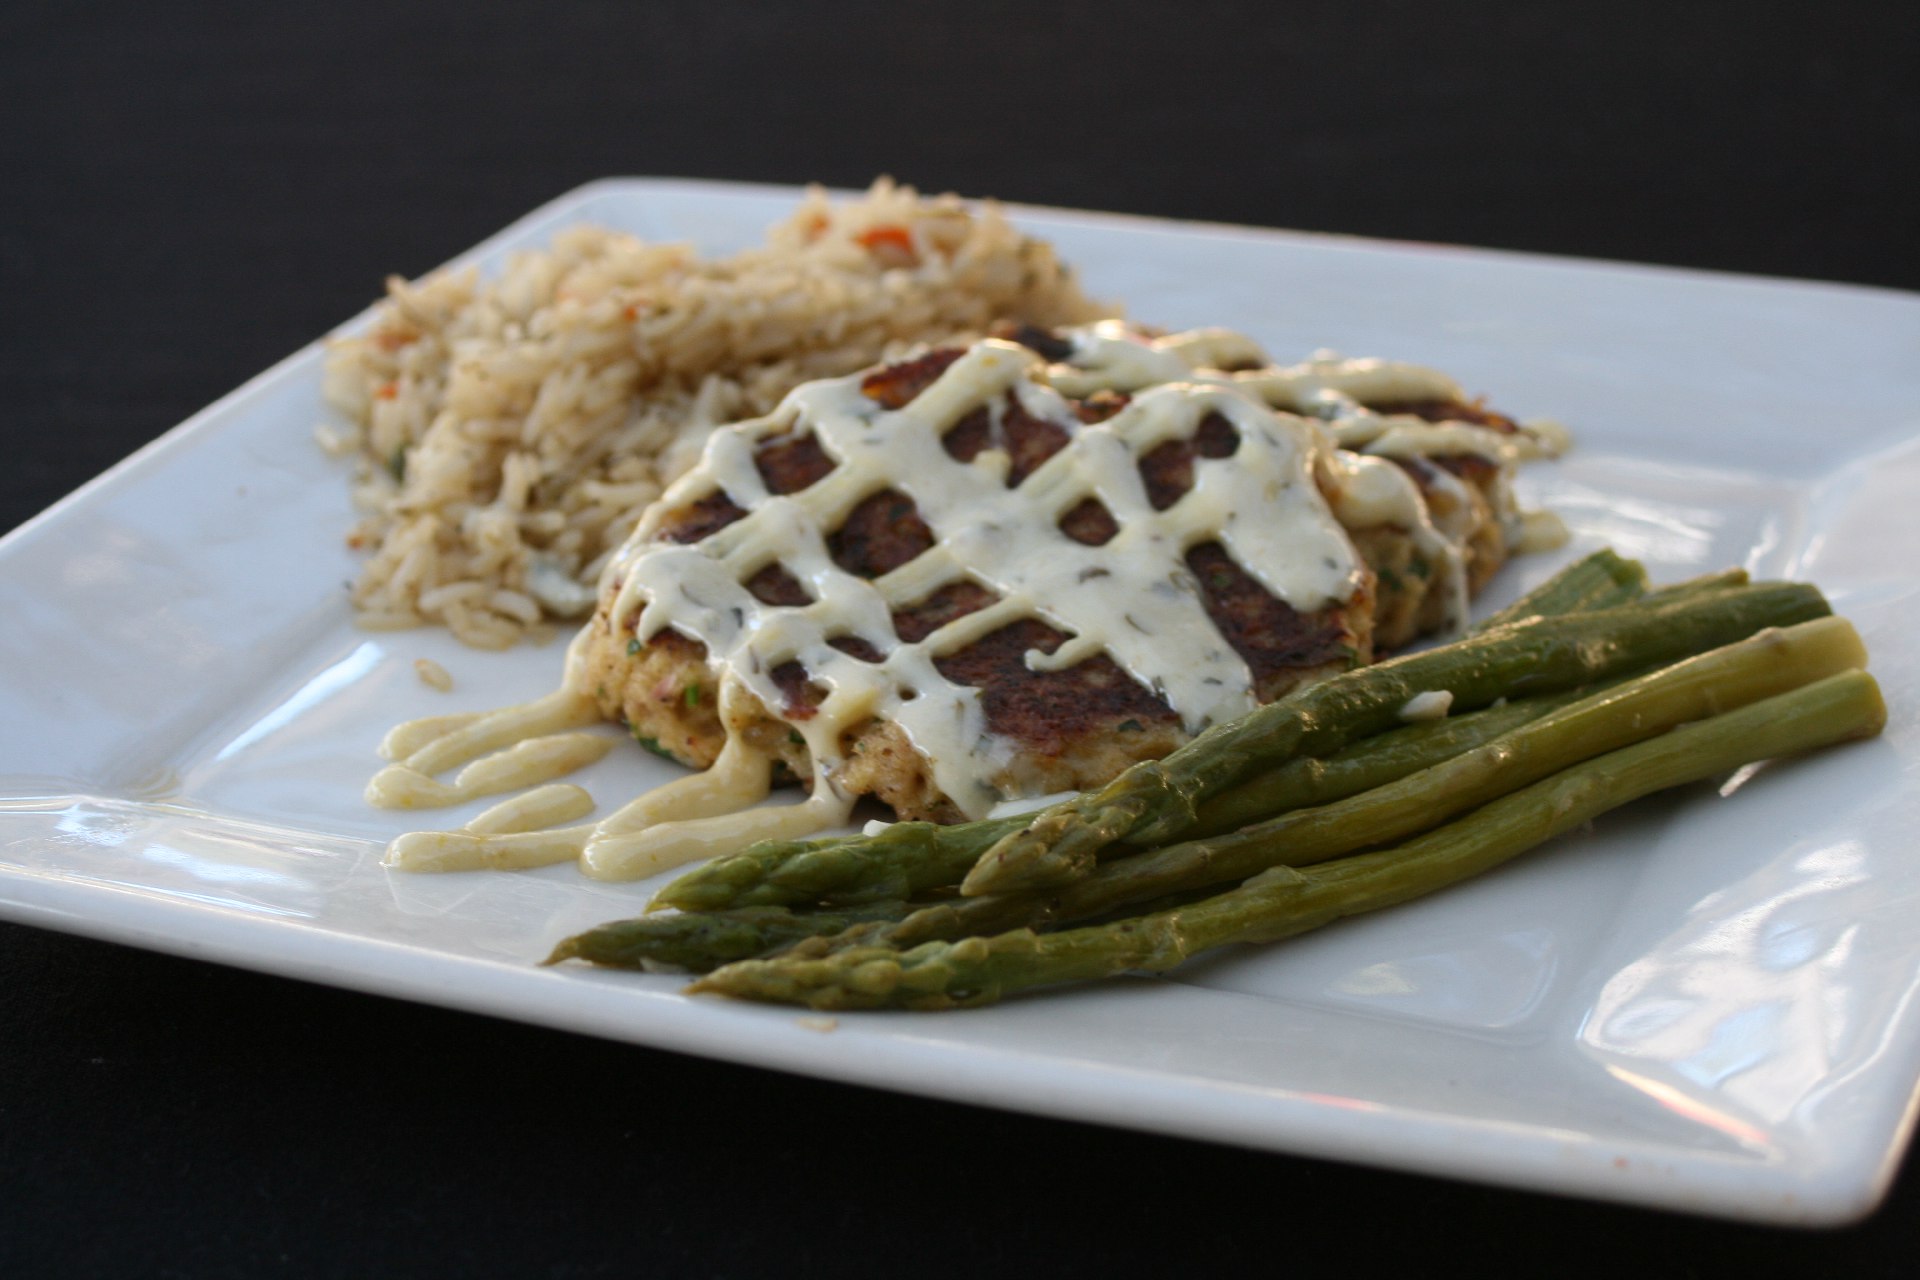 crab cakes topped with remoulade sauce and house rice